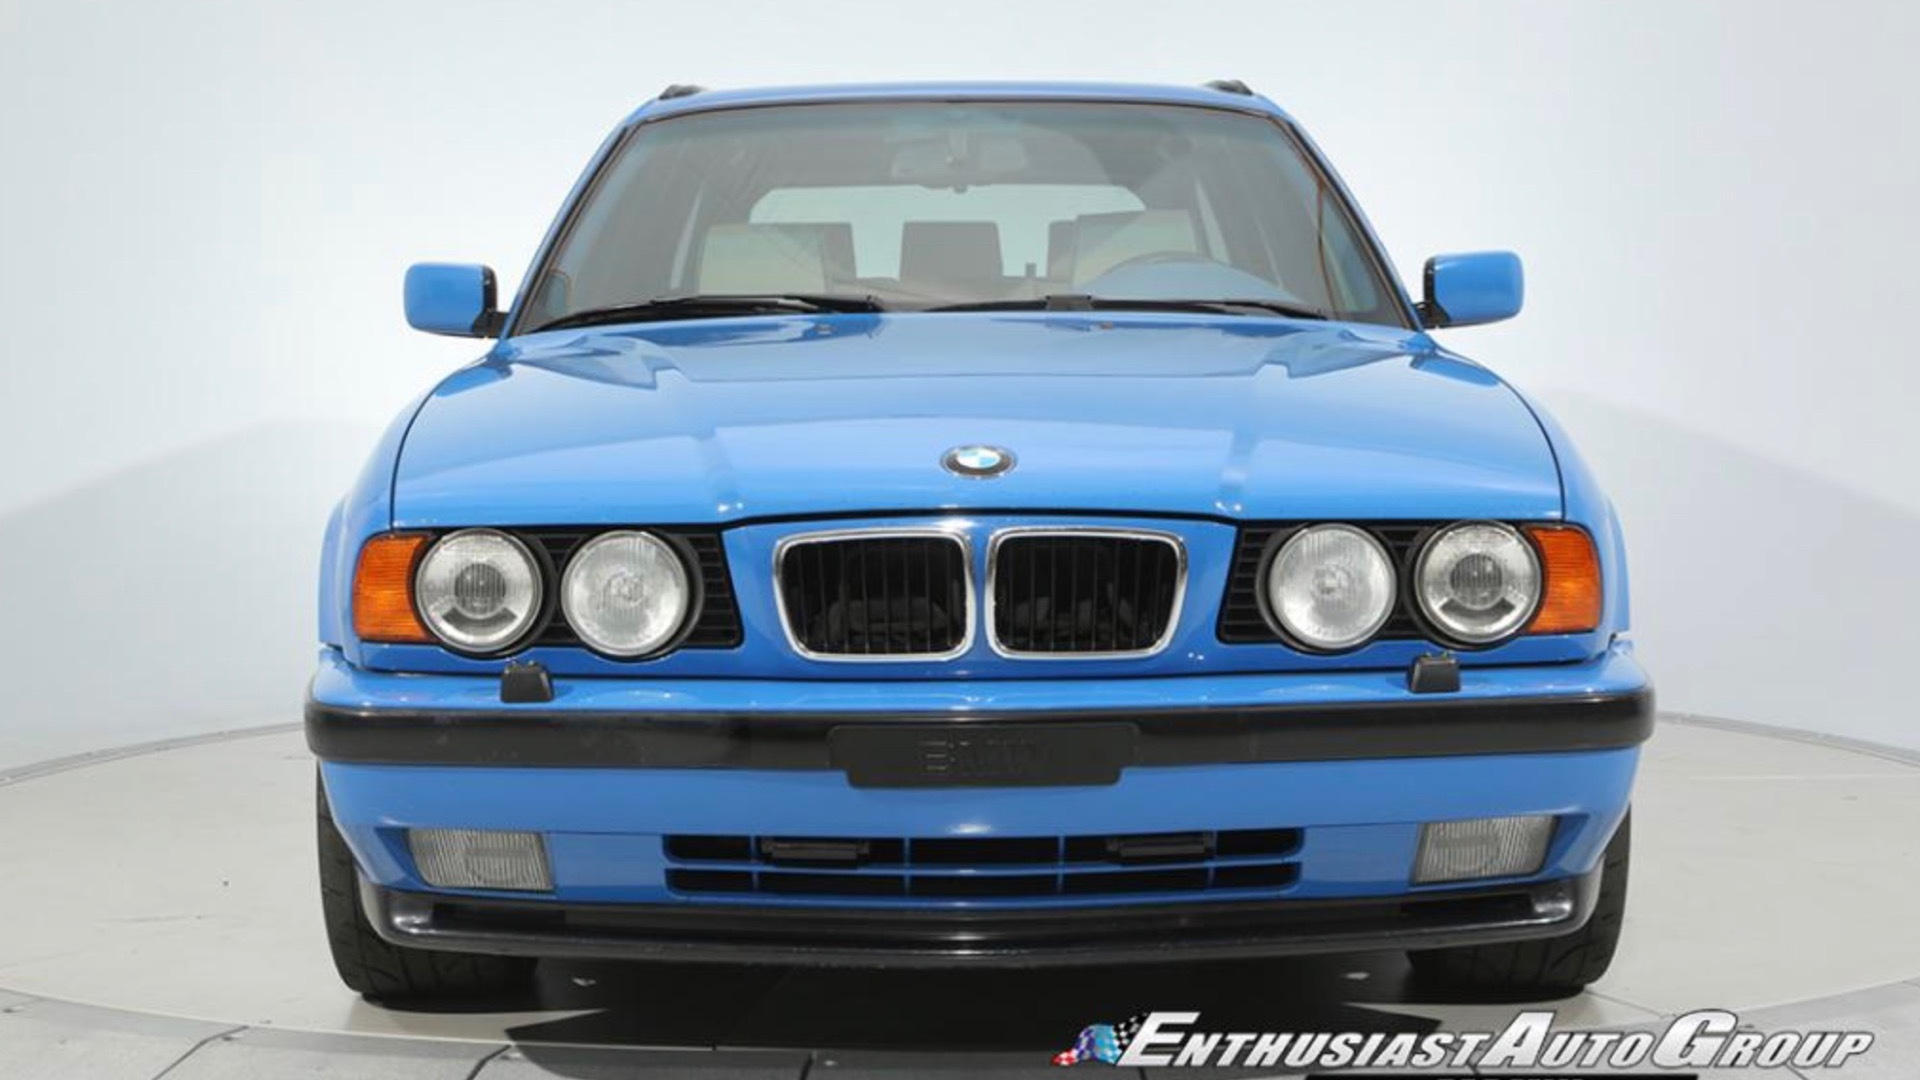 1995 BMW M5 Touring (Photo by Enthusiast Auto Group)